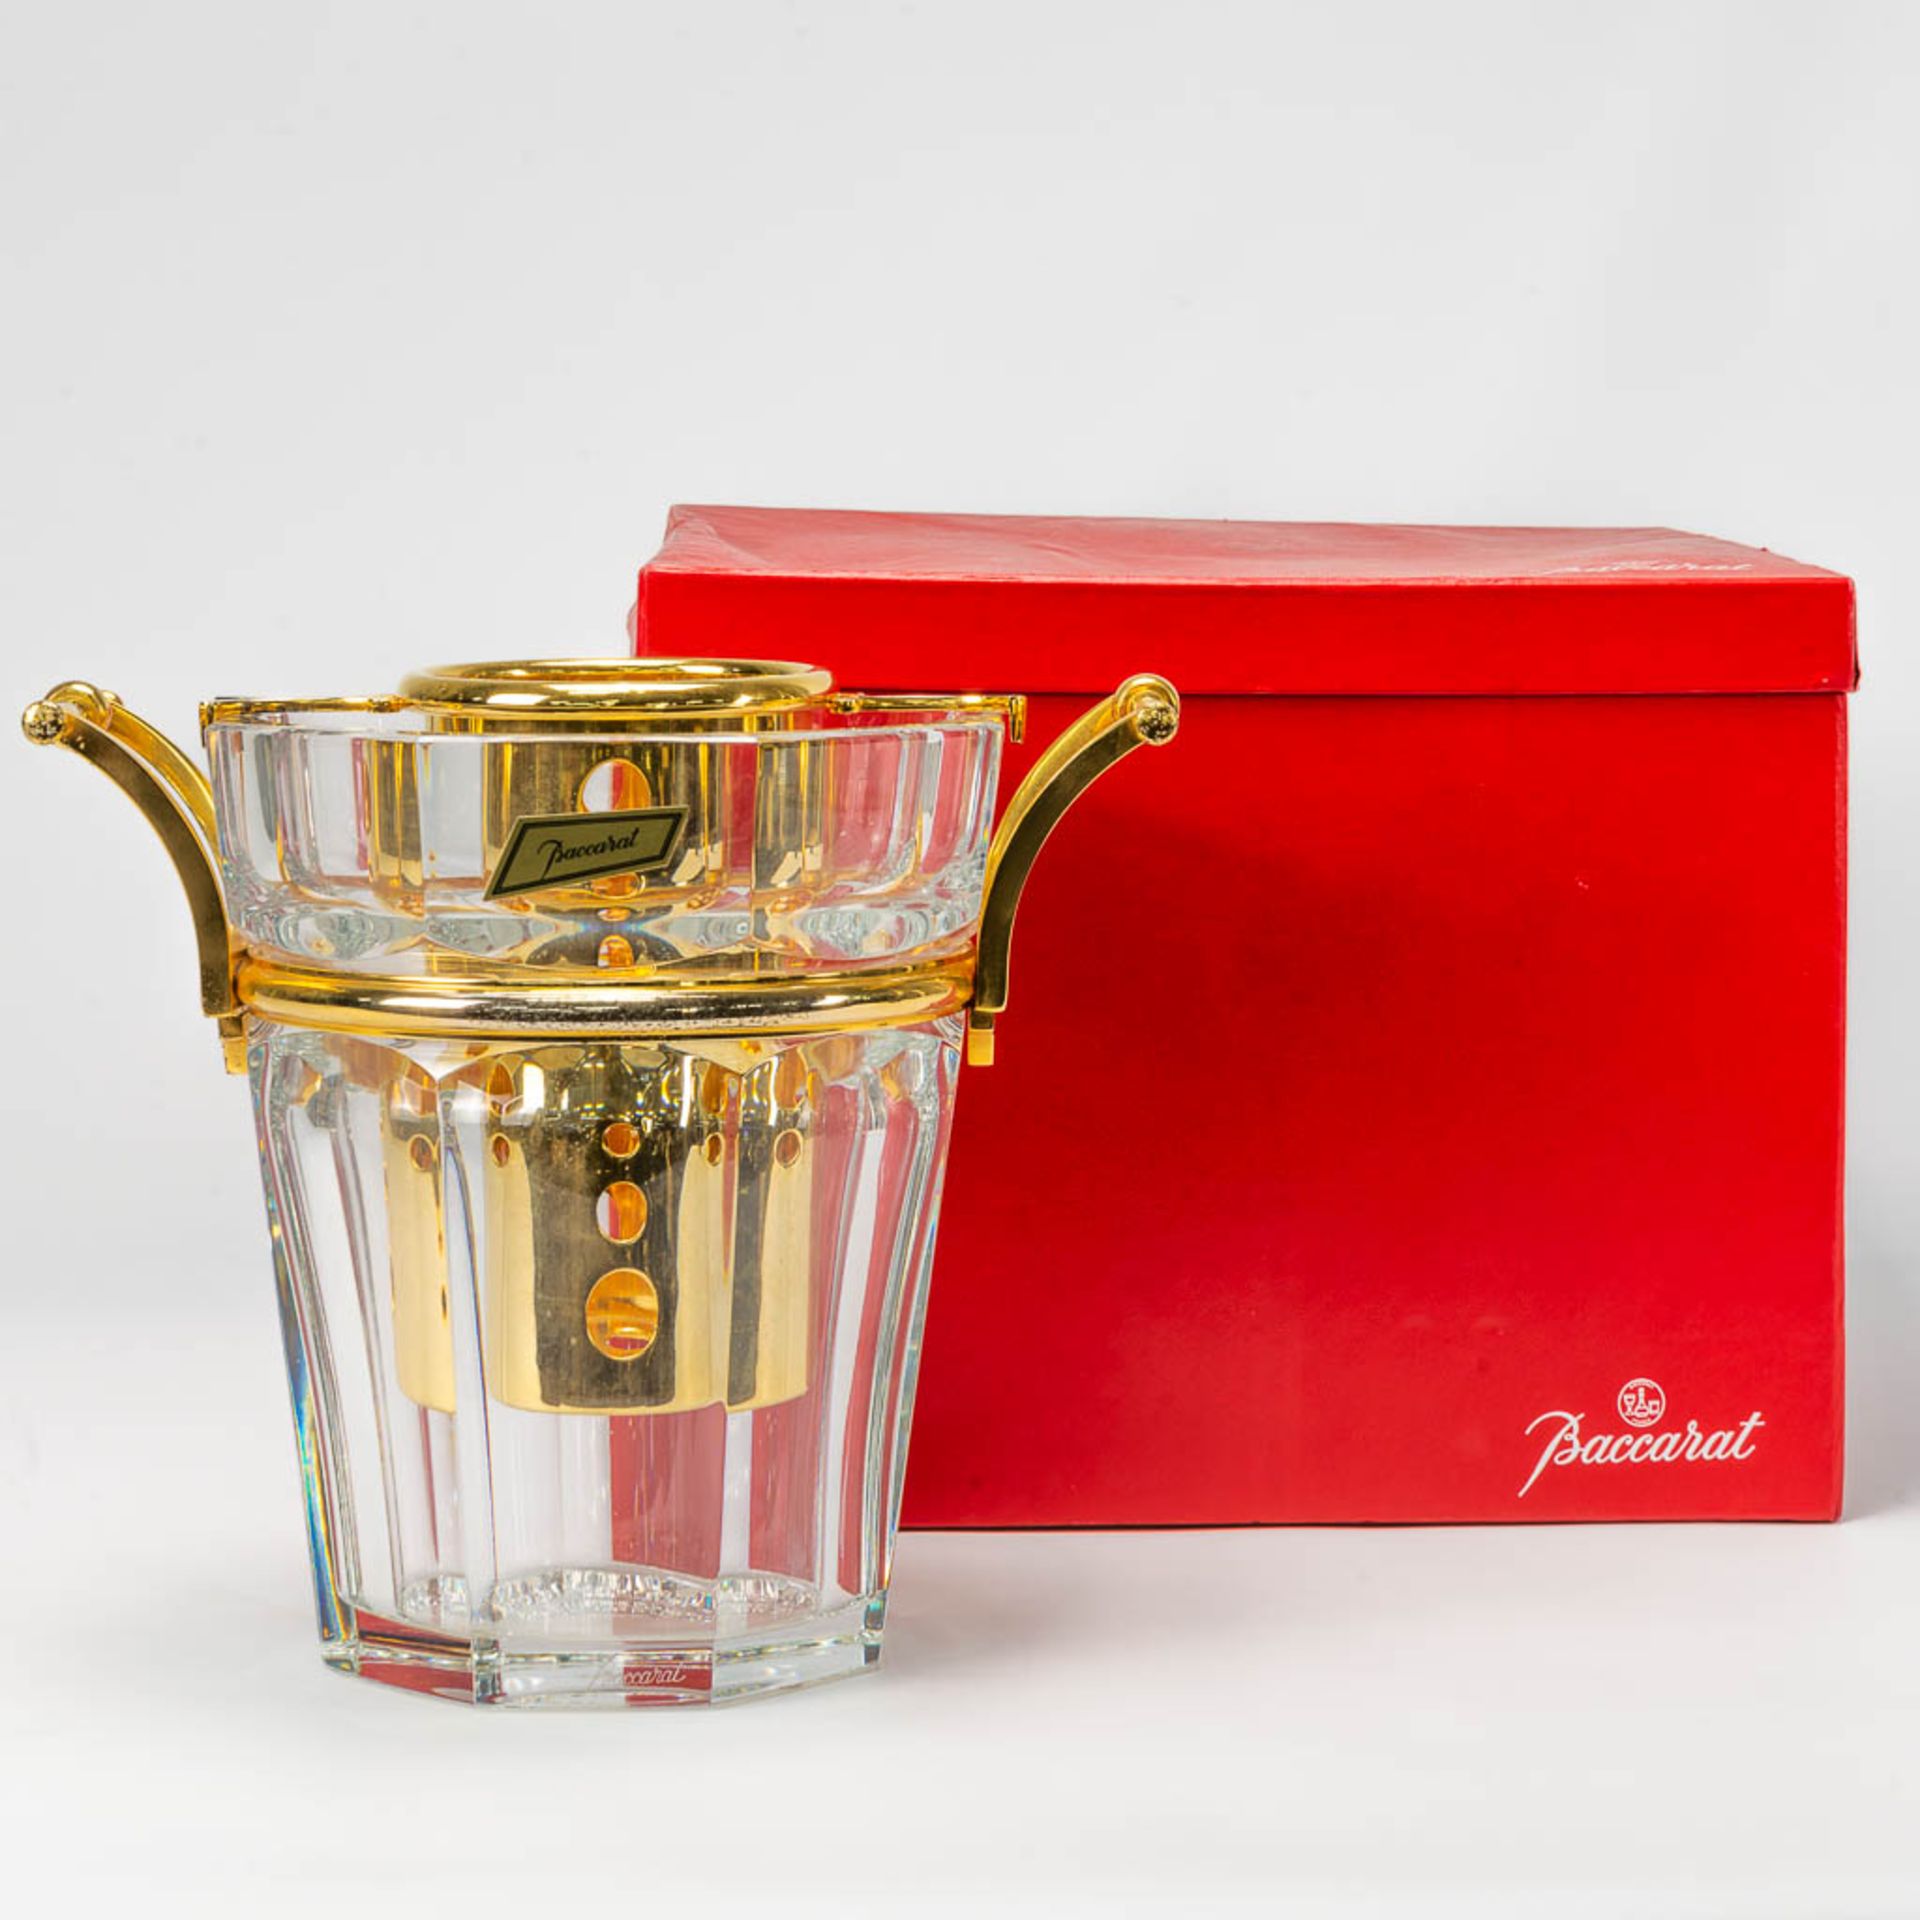 A Baccarat wine cooler or Champage bucket, made of Crystal with gold plated metal in the original bo